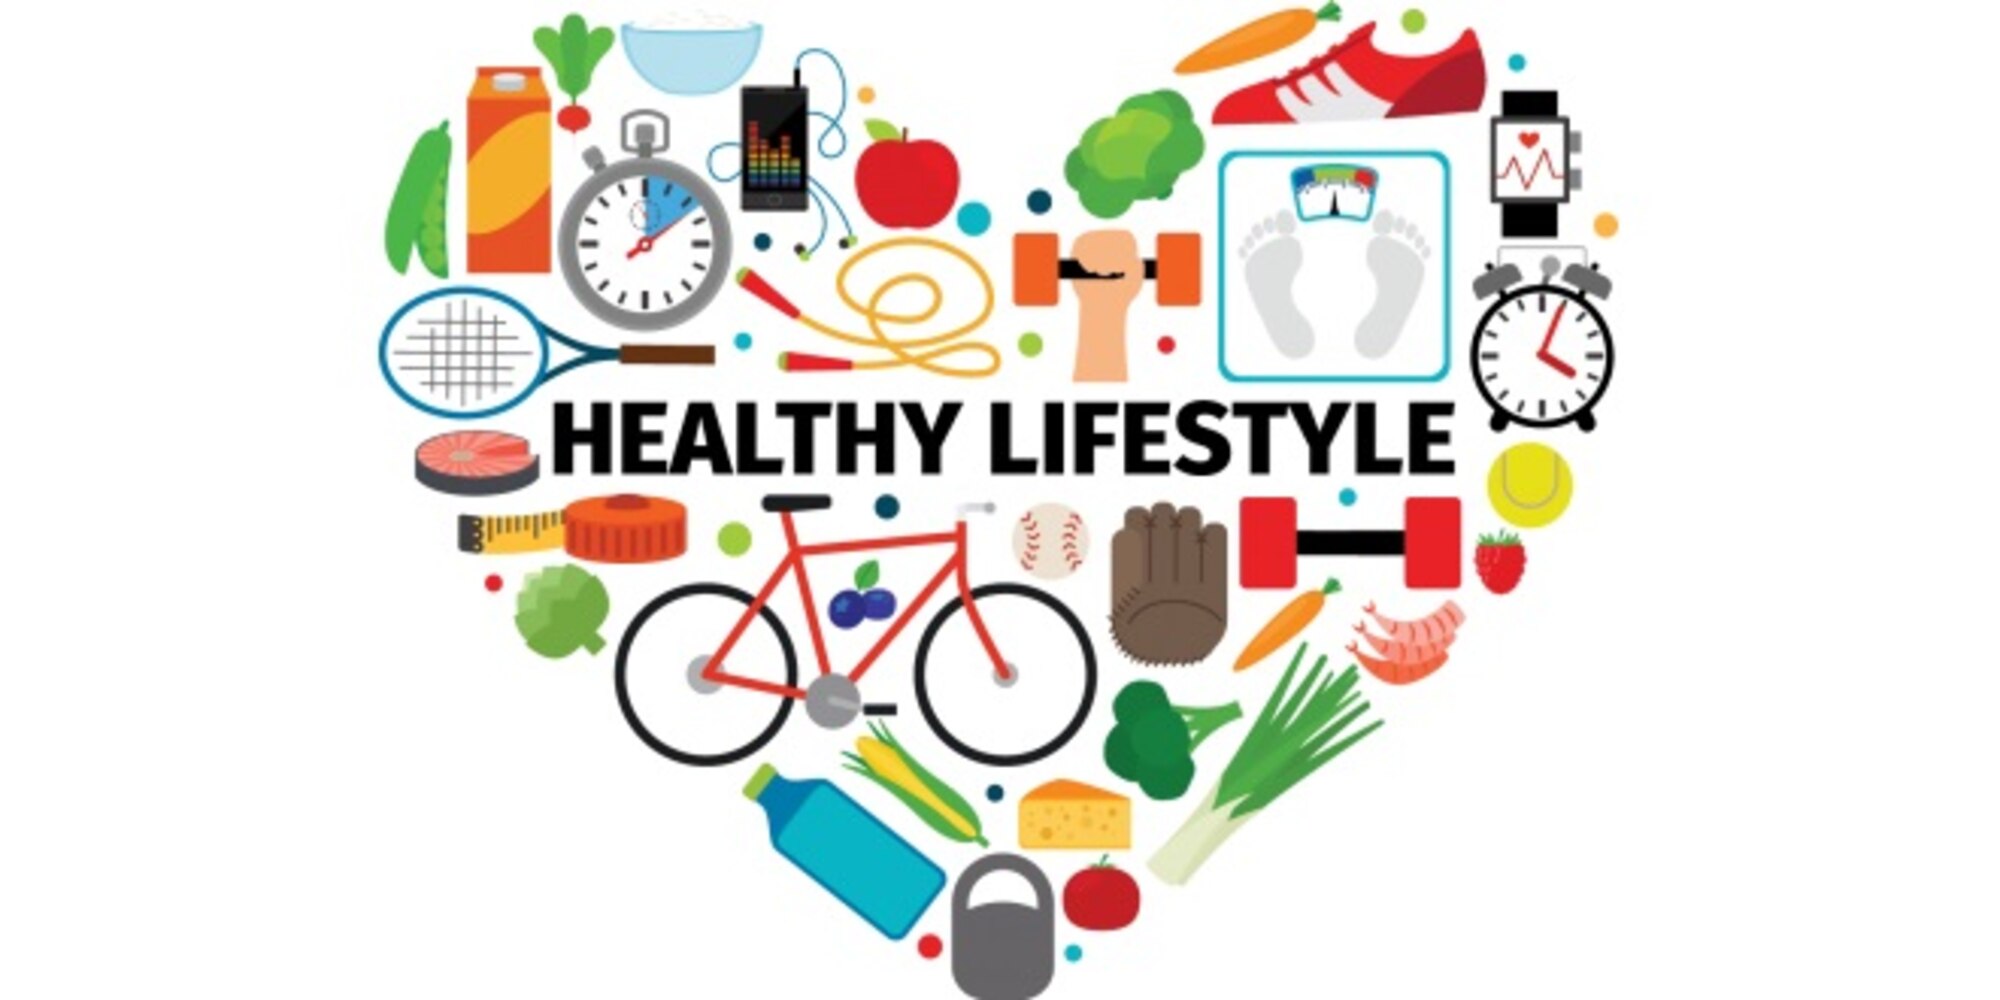 Combining healthy diet, exercise and sleep habits is the key to an overall healthful lifestyle, something that is paramount in many people’s minds during the ongoing pandemic.